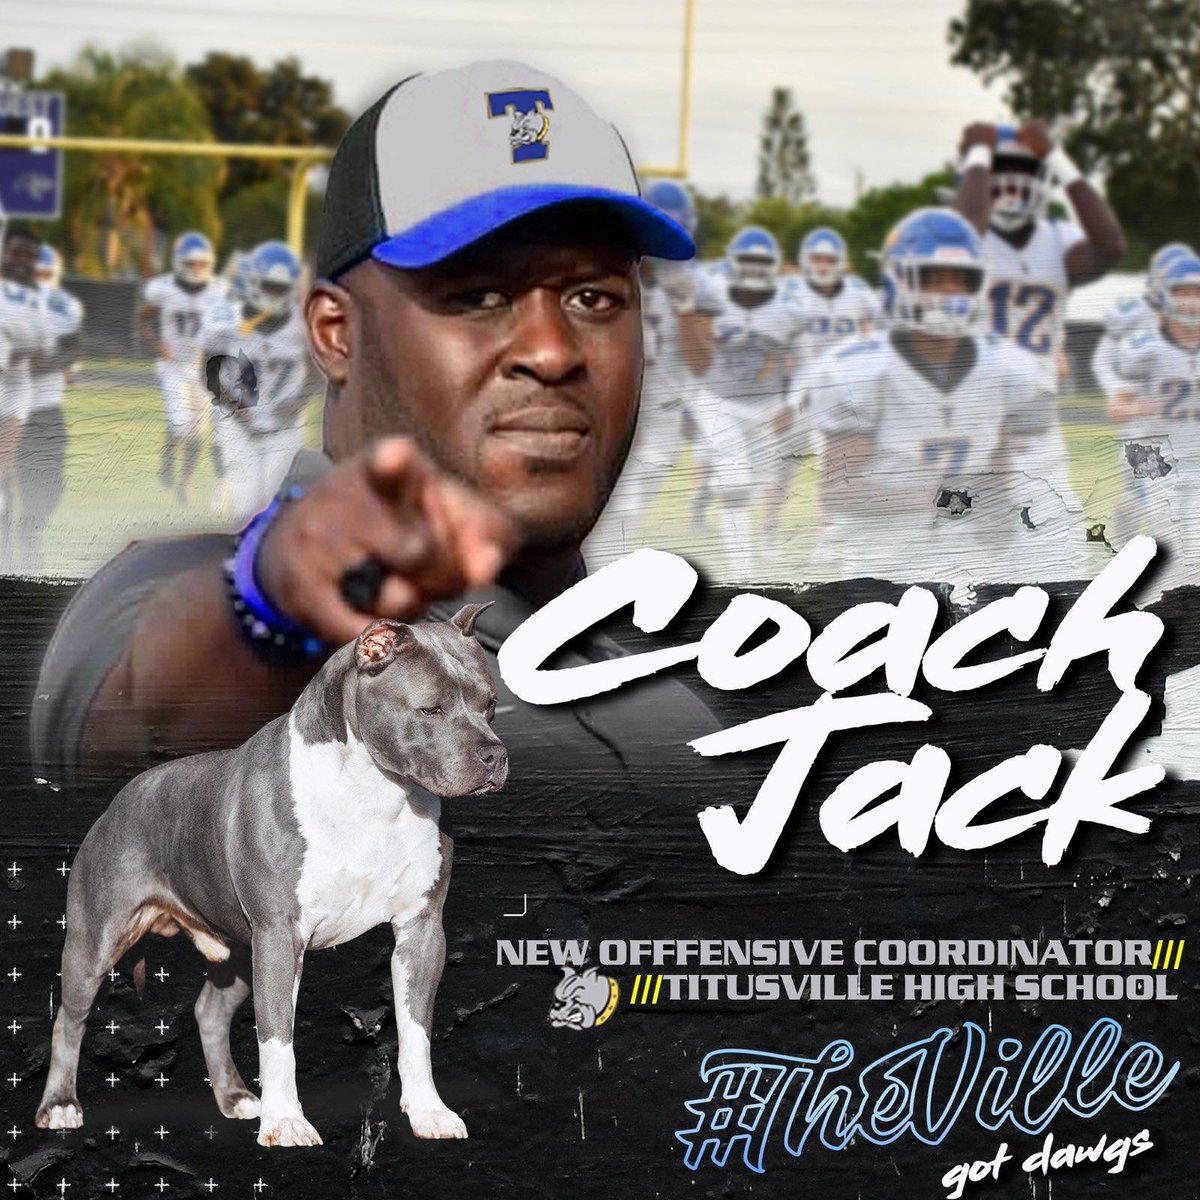 Our New Offensive Coordinator @COACHPEEJAYJACK!! Coach Jack is an @Elite11 Quarterback Coach, is also the Quarterback Coach for the @TropicalBowlUSA and was an Intern Assistant WRs Coach with @Jaguars Lets Welcome Coach Jack back to #theville